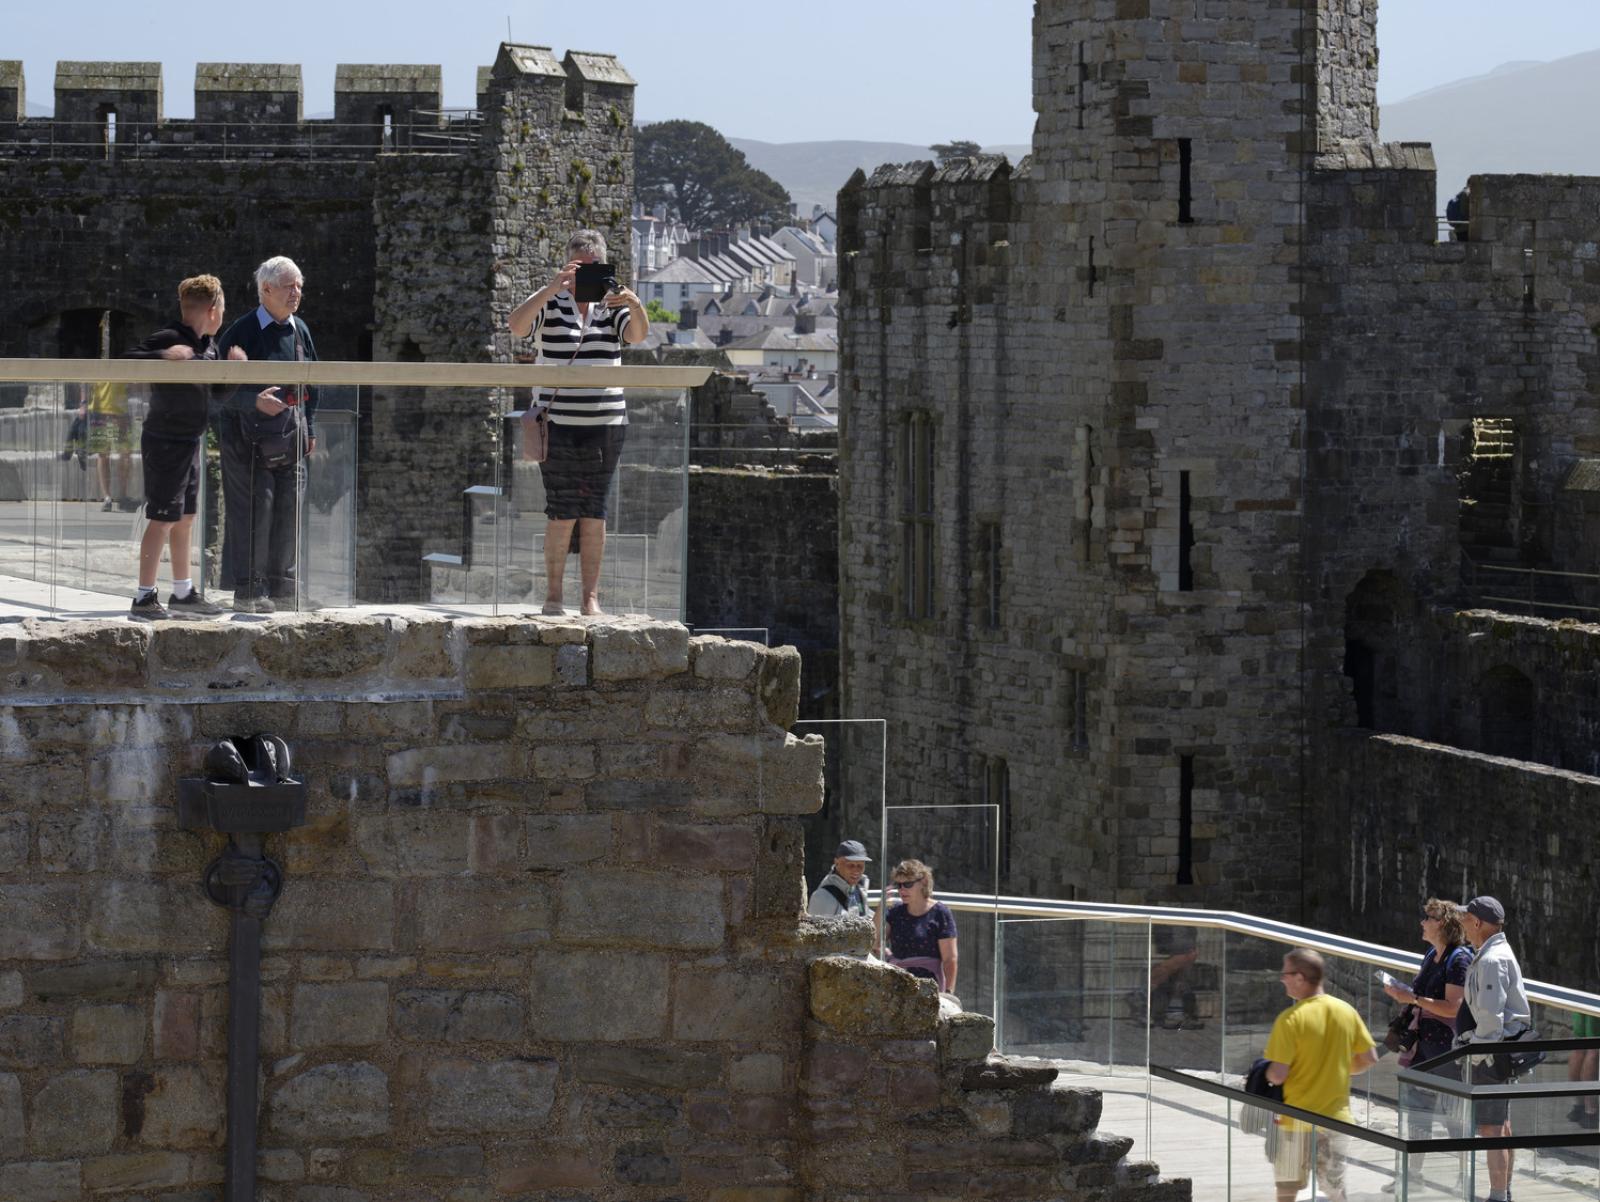 visitors mill about on two level external decks at caernarfon castle